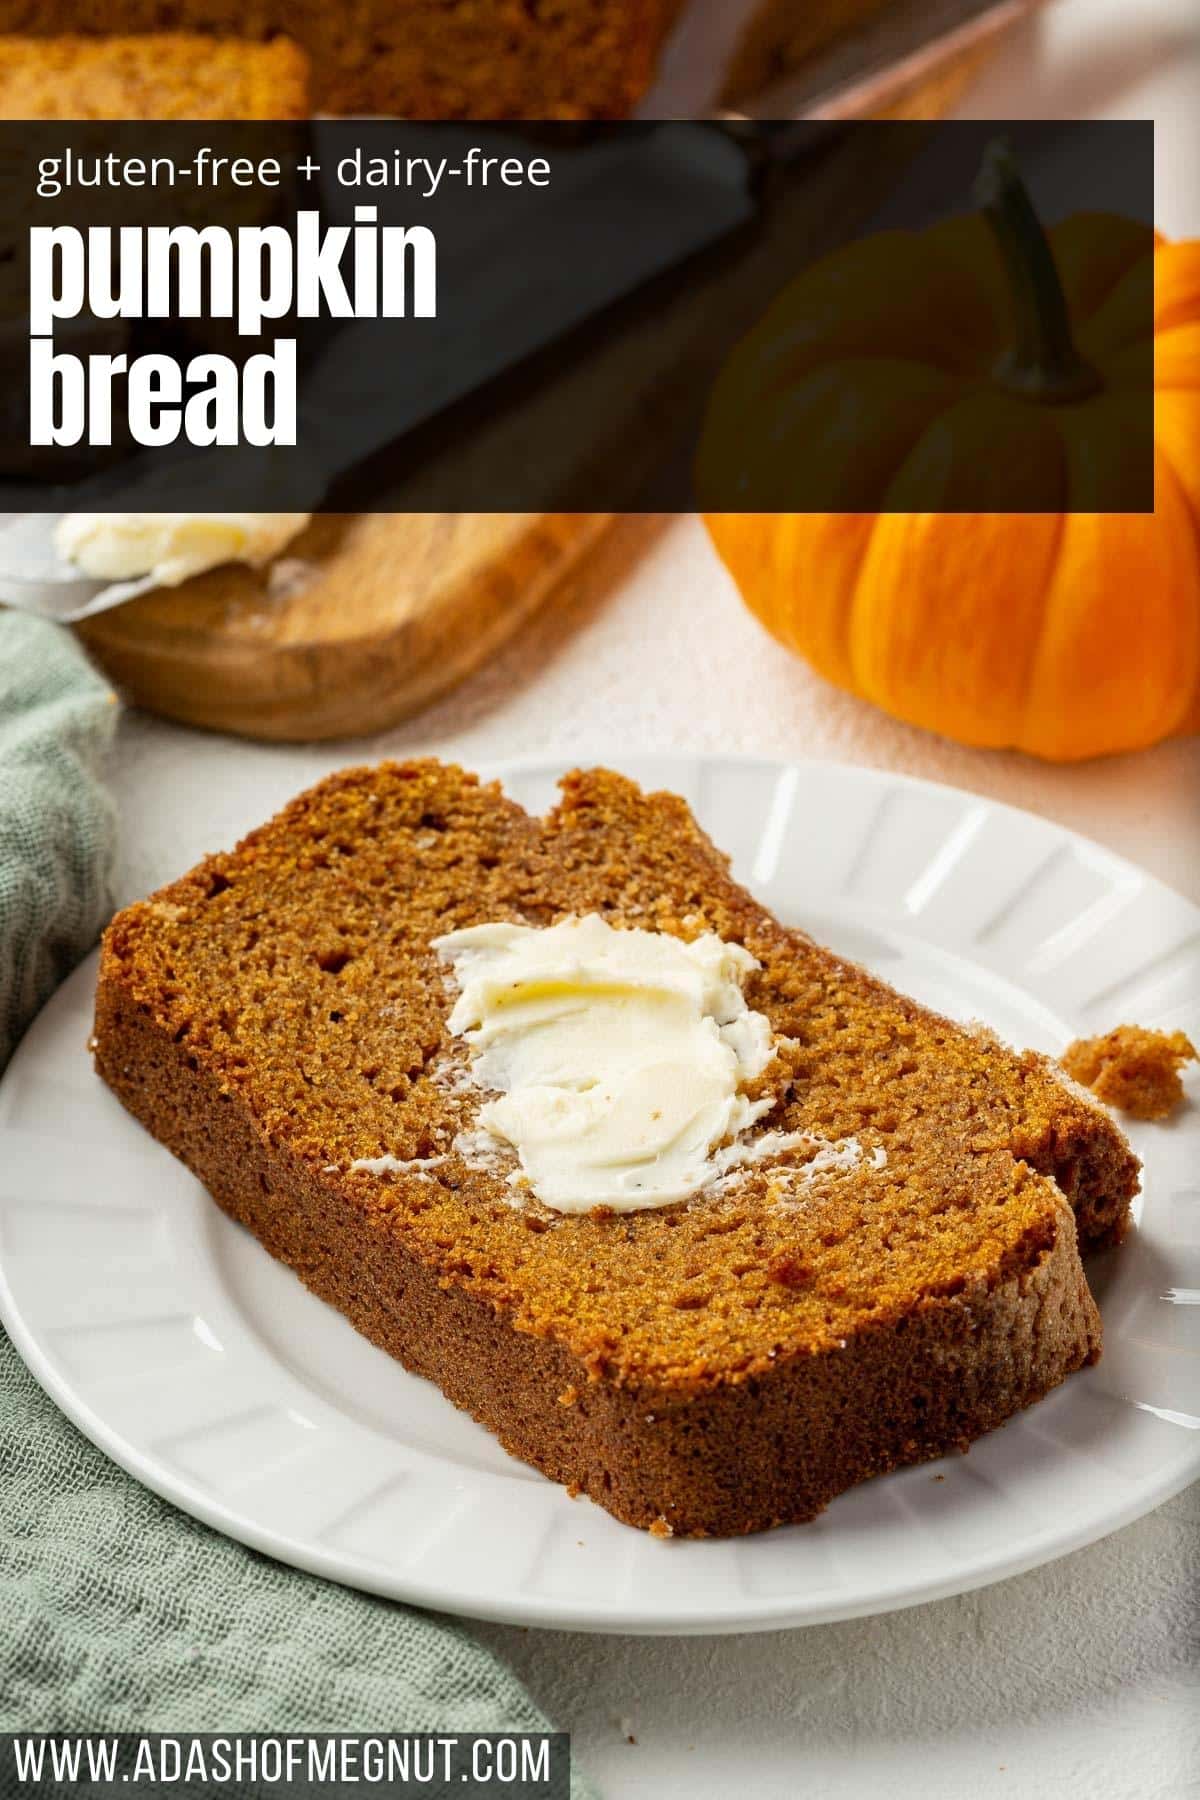 A single slice of gf pumpkin bread on a dessert plate and slathered with butter.